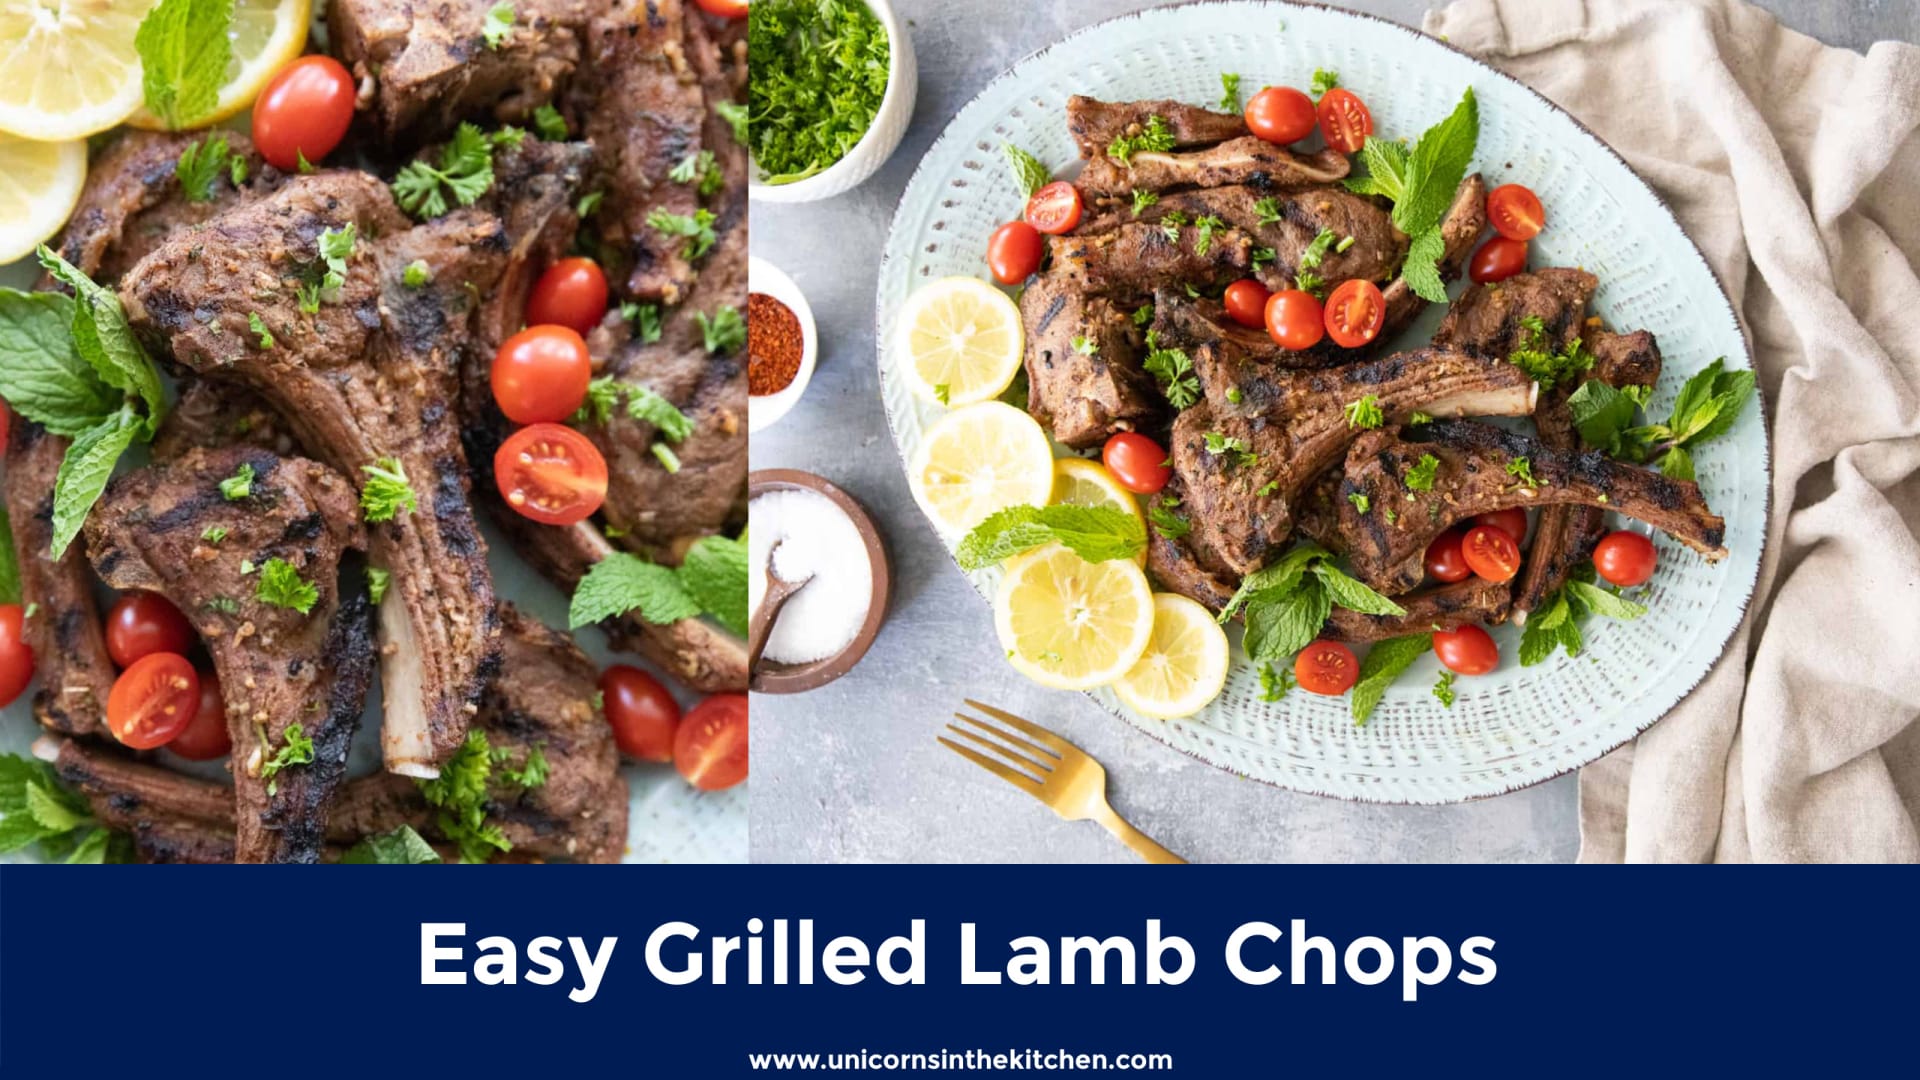 Easy Grilled Lamb Chops Recipe - Pinch and Swirl